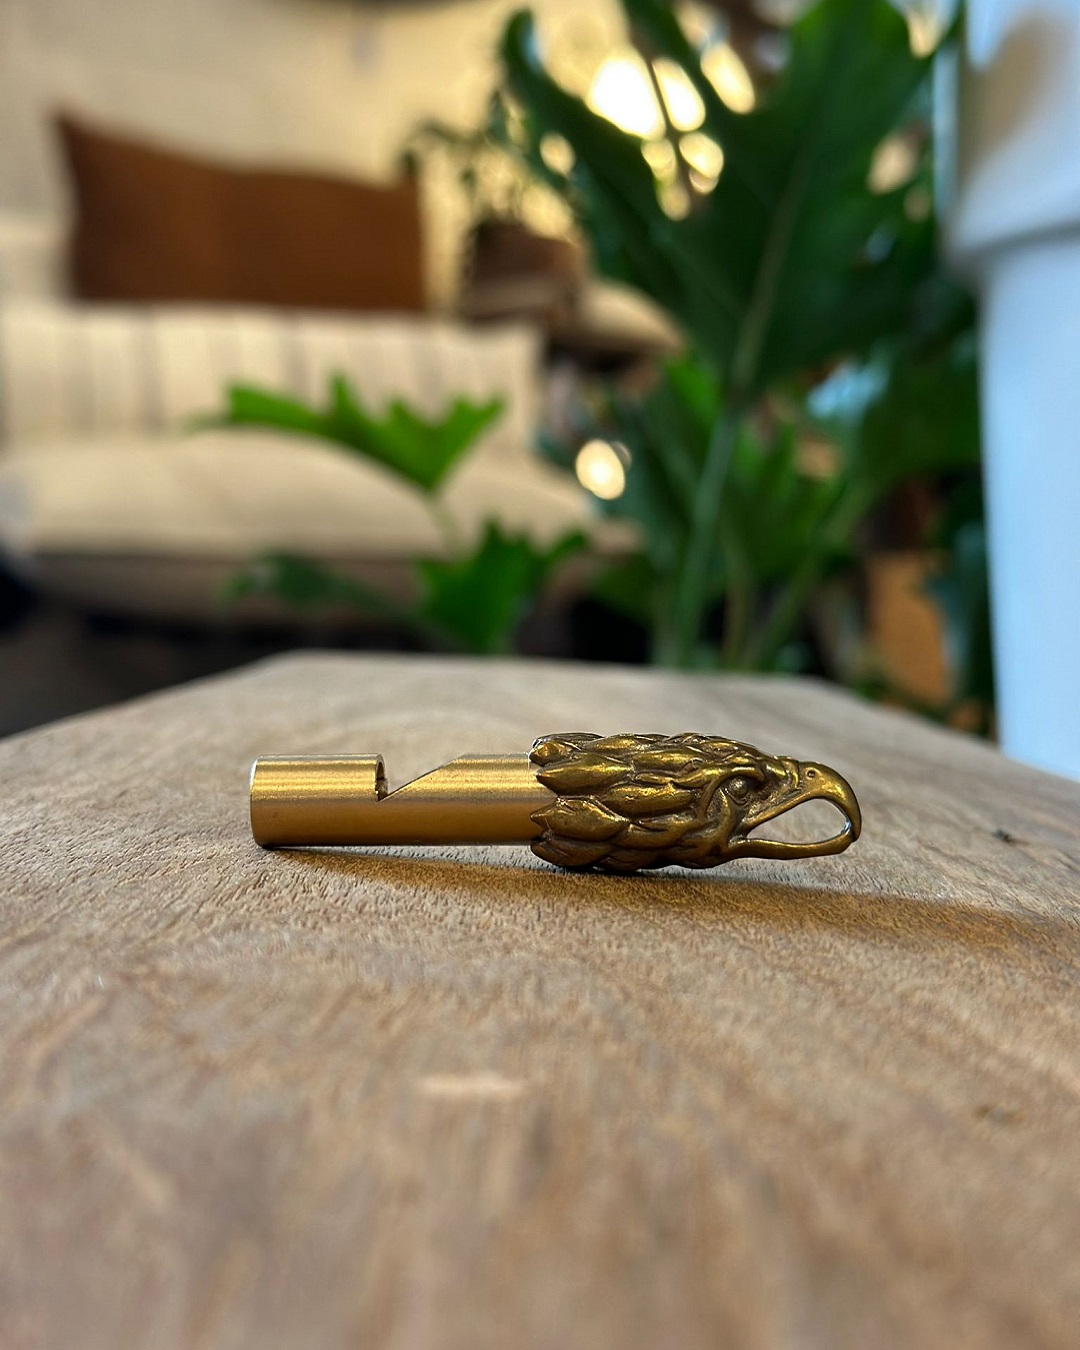 Gold eagle keyring on a table